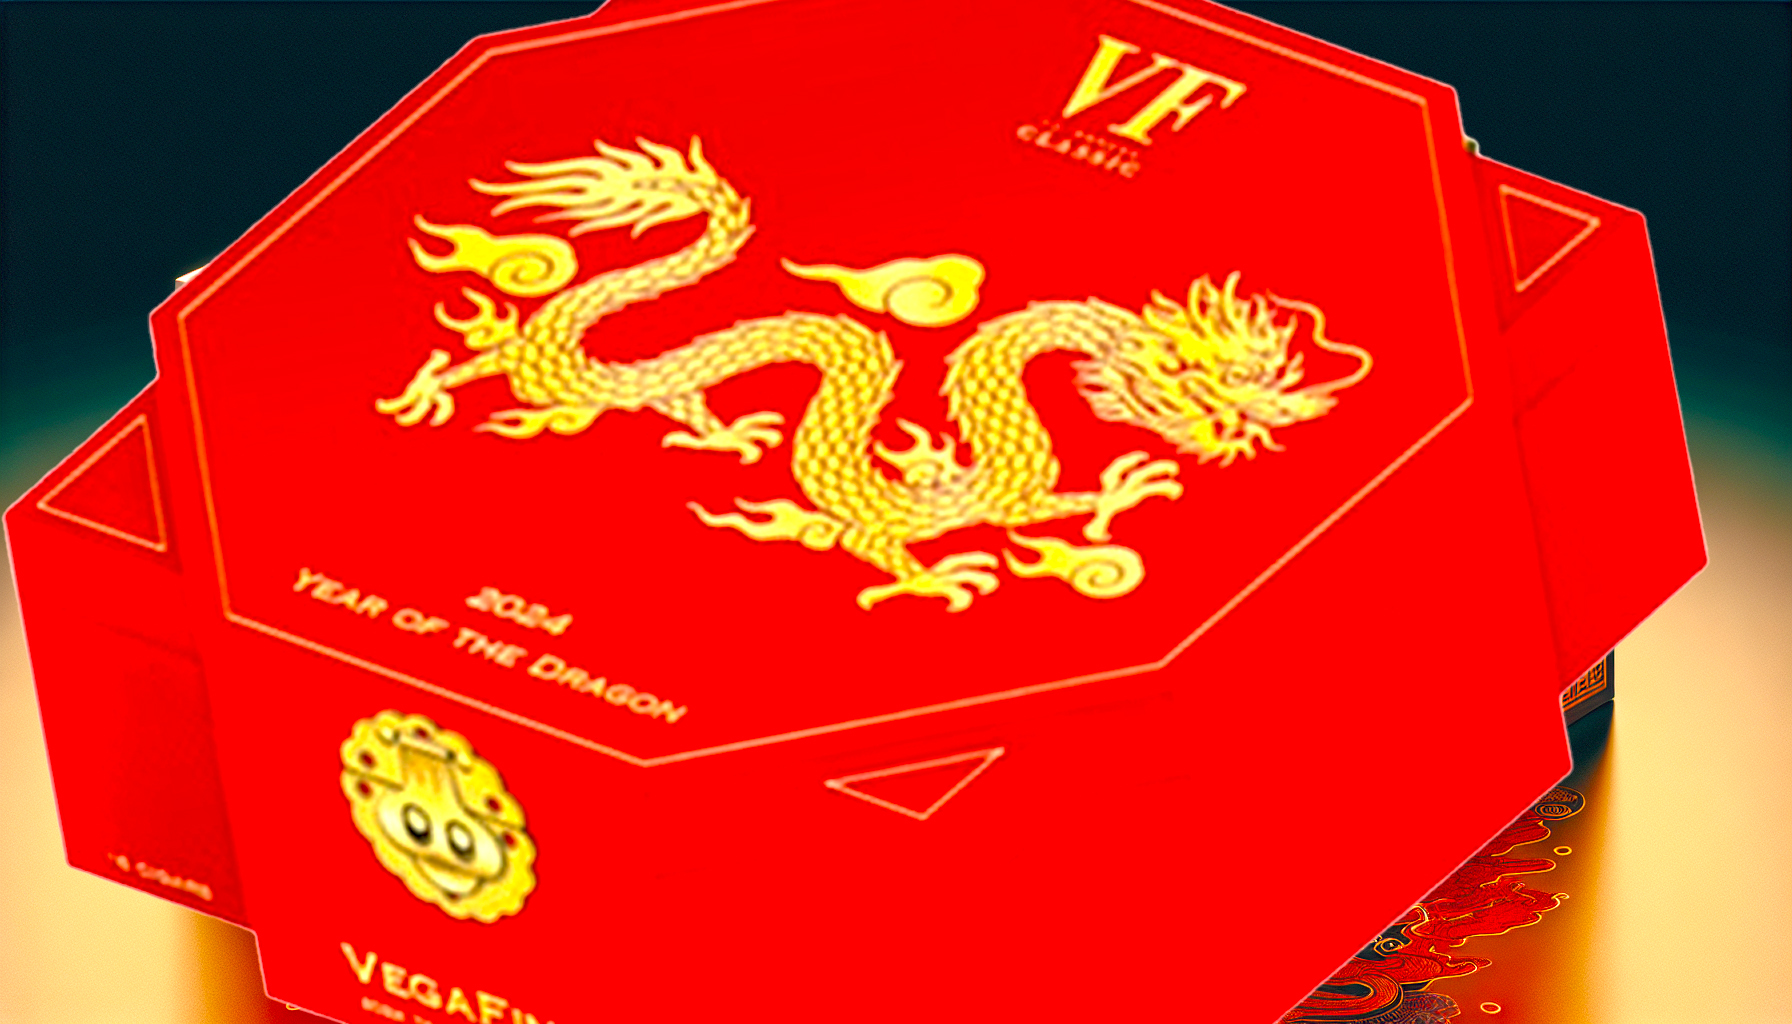 Red and gold box design for Year of the Dragon cigar